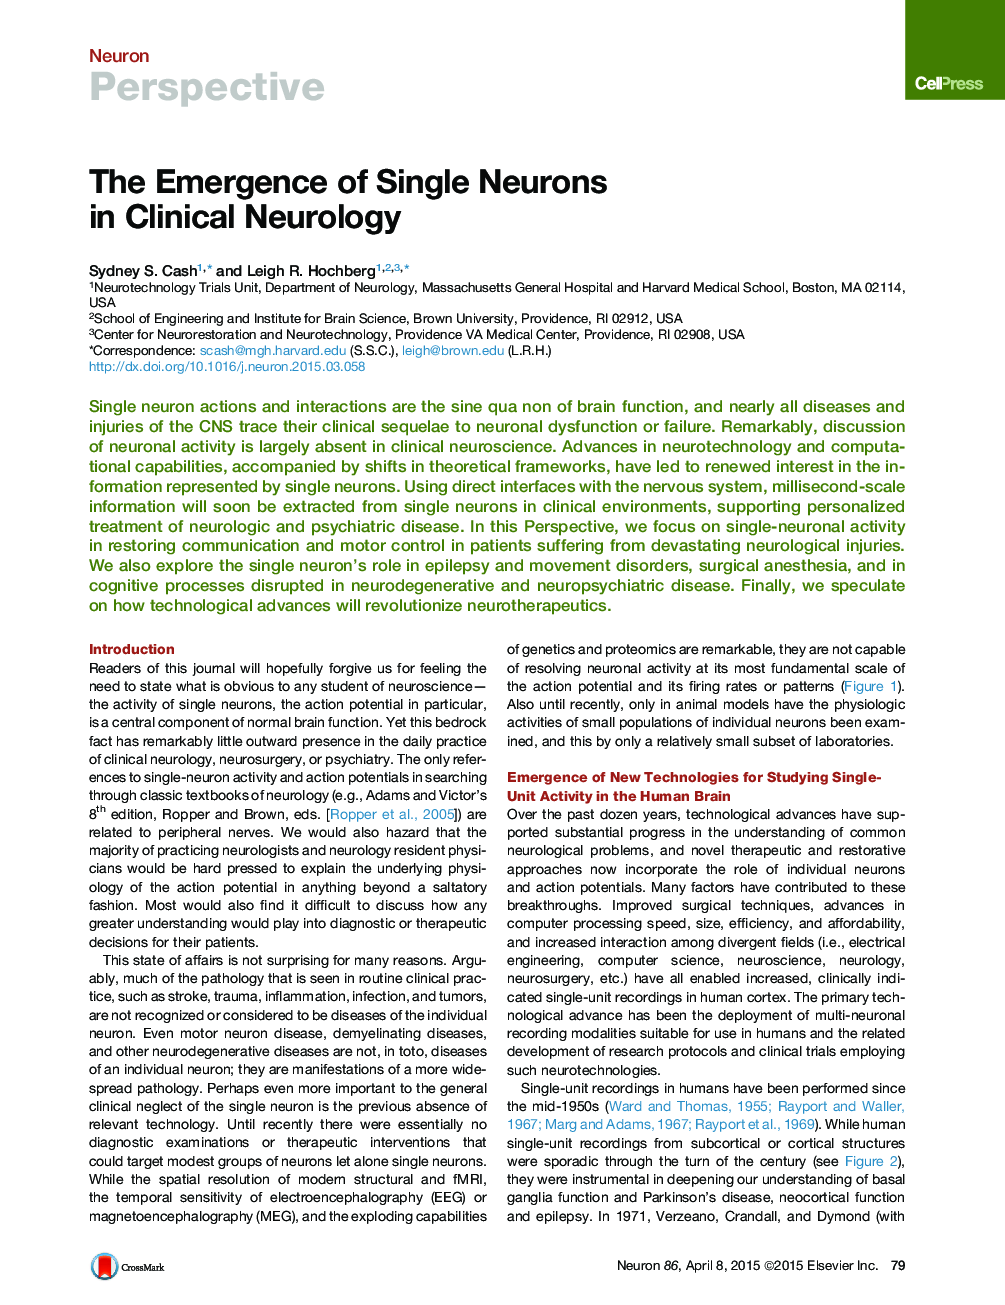 The Emergence of Single Neurons in Clinical Neurology